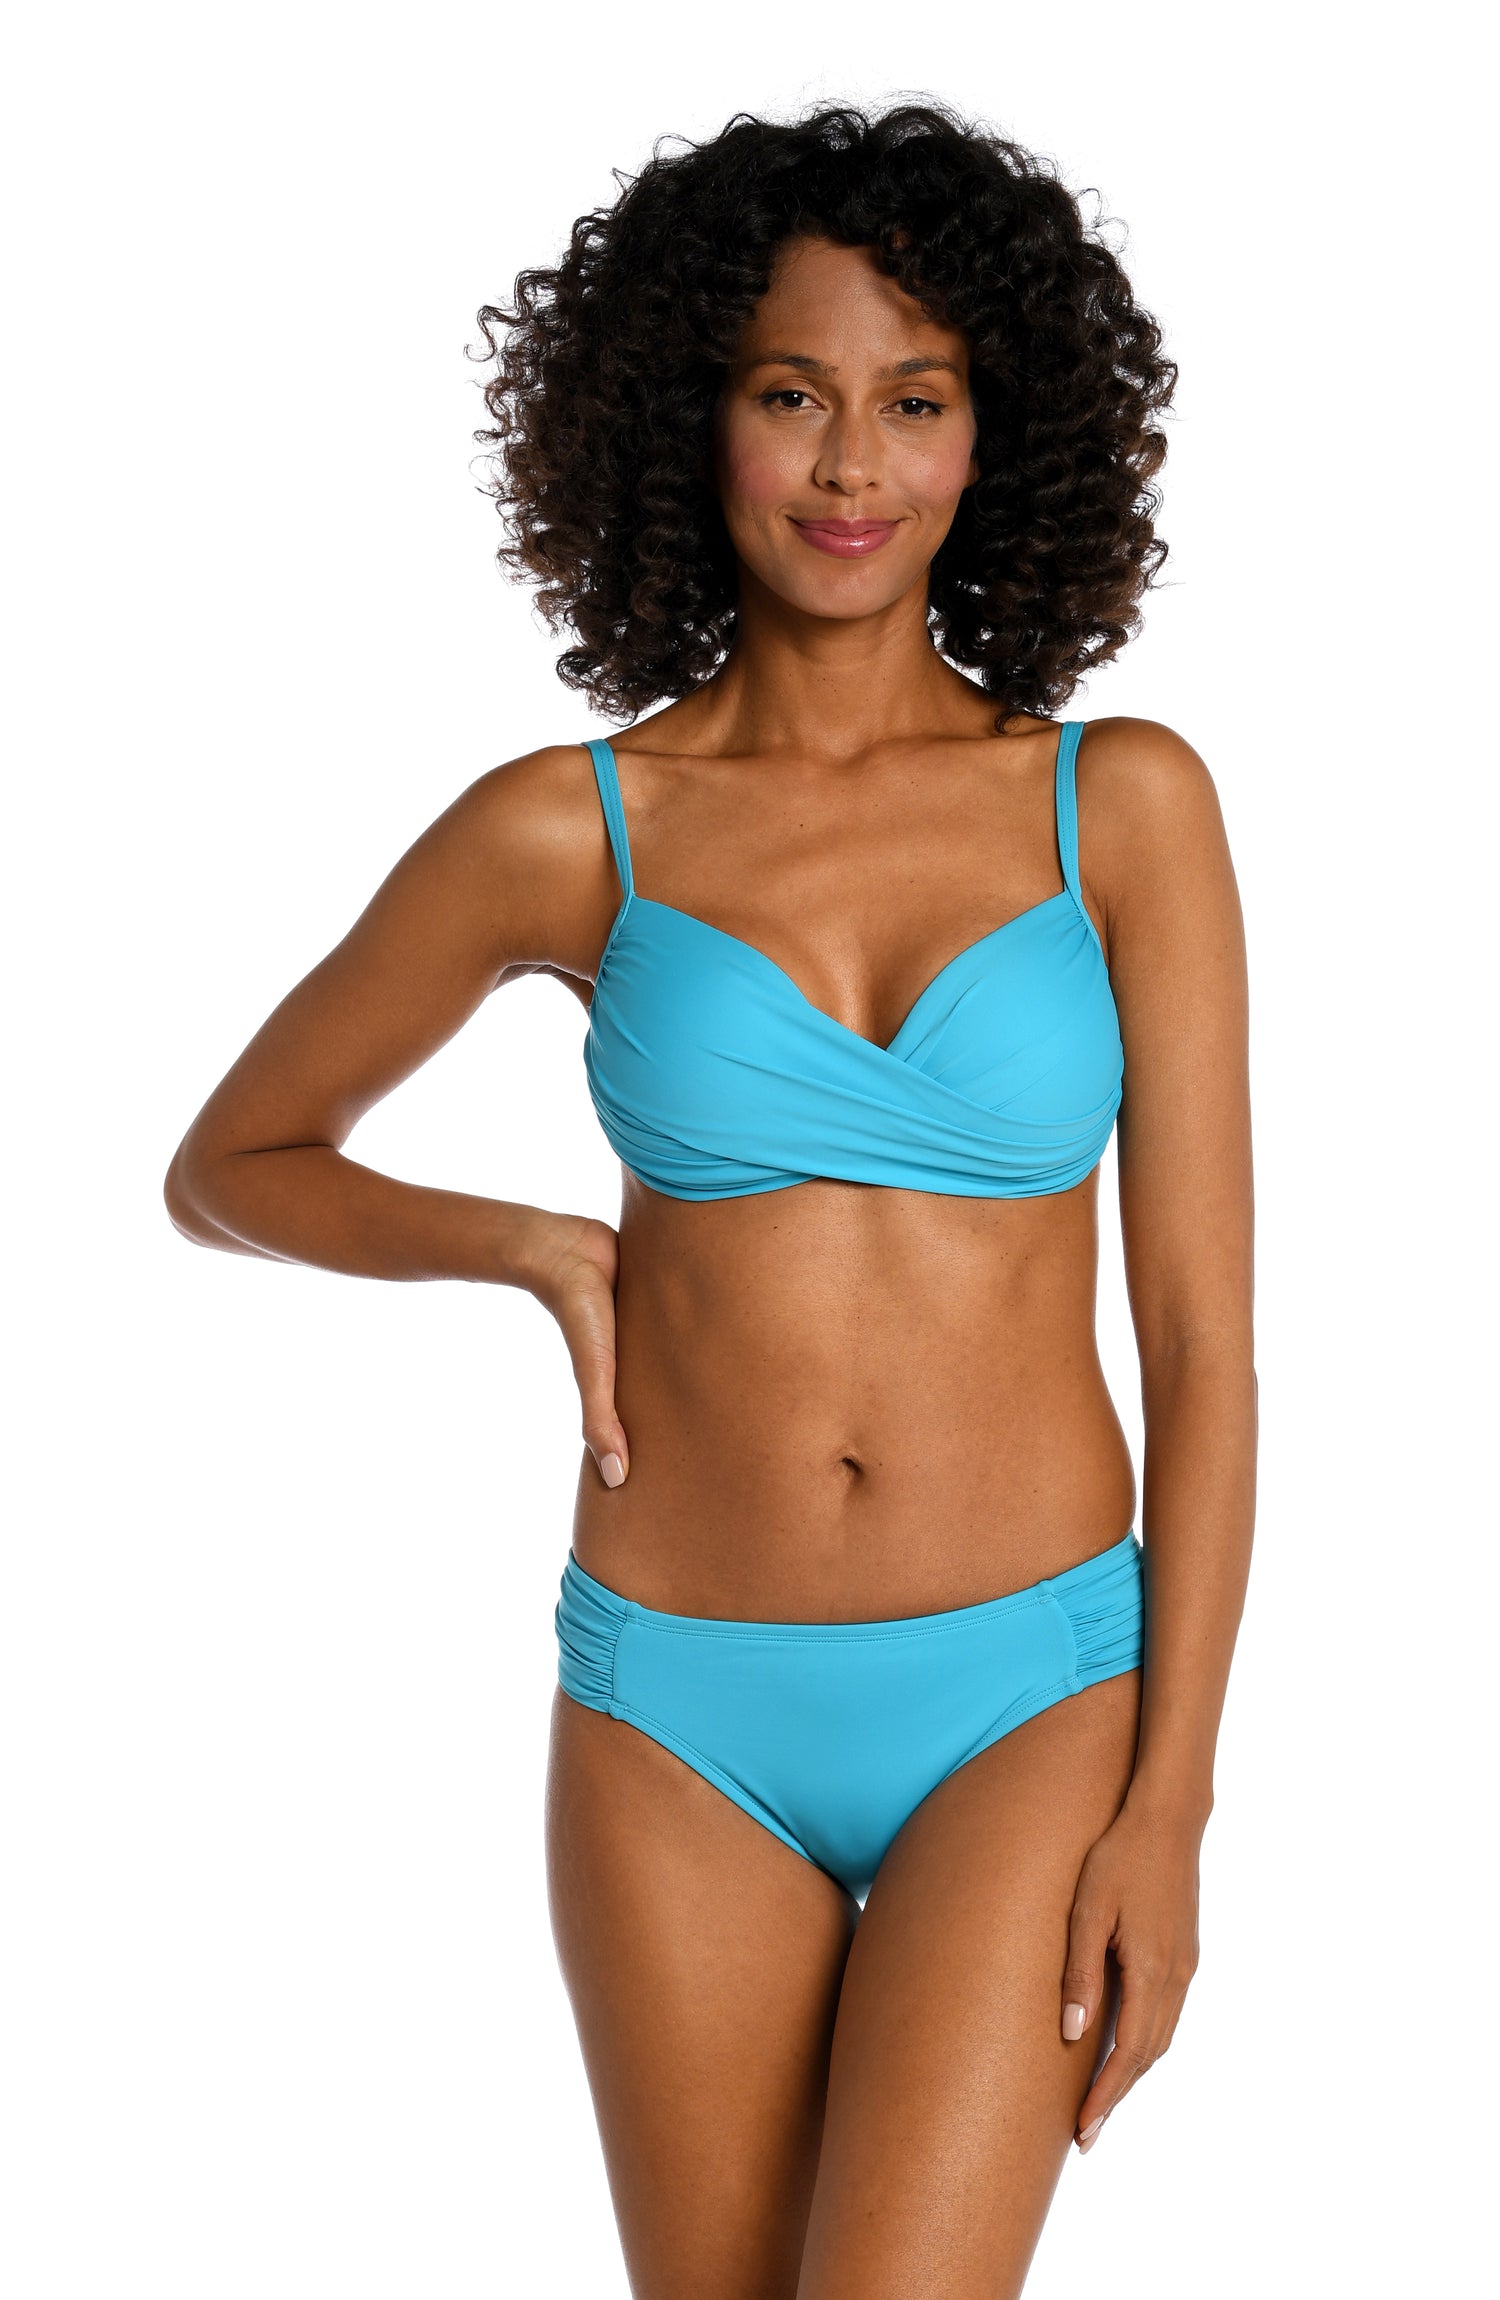 Model is wearing a azul (light blue) colored over the shoulder swimsuit top from our Best-Selling Island Goddess collection.